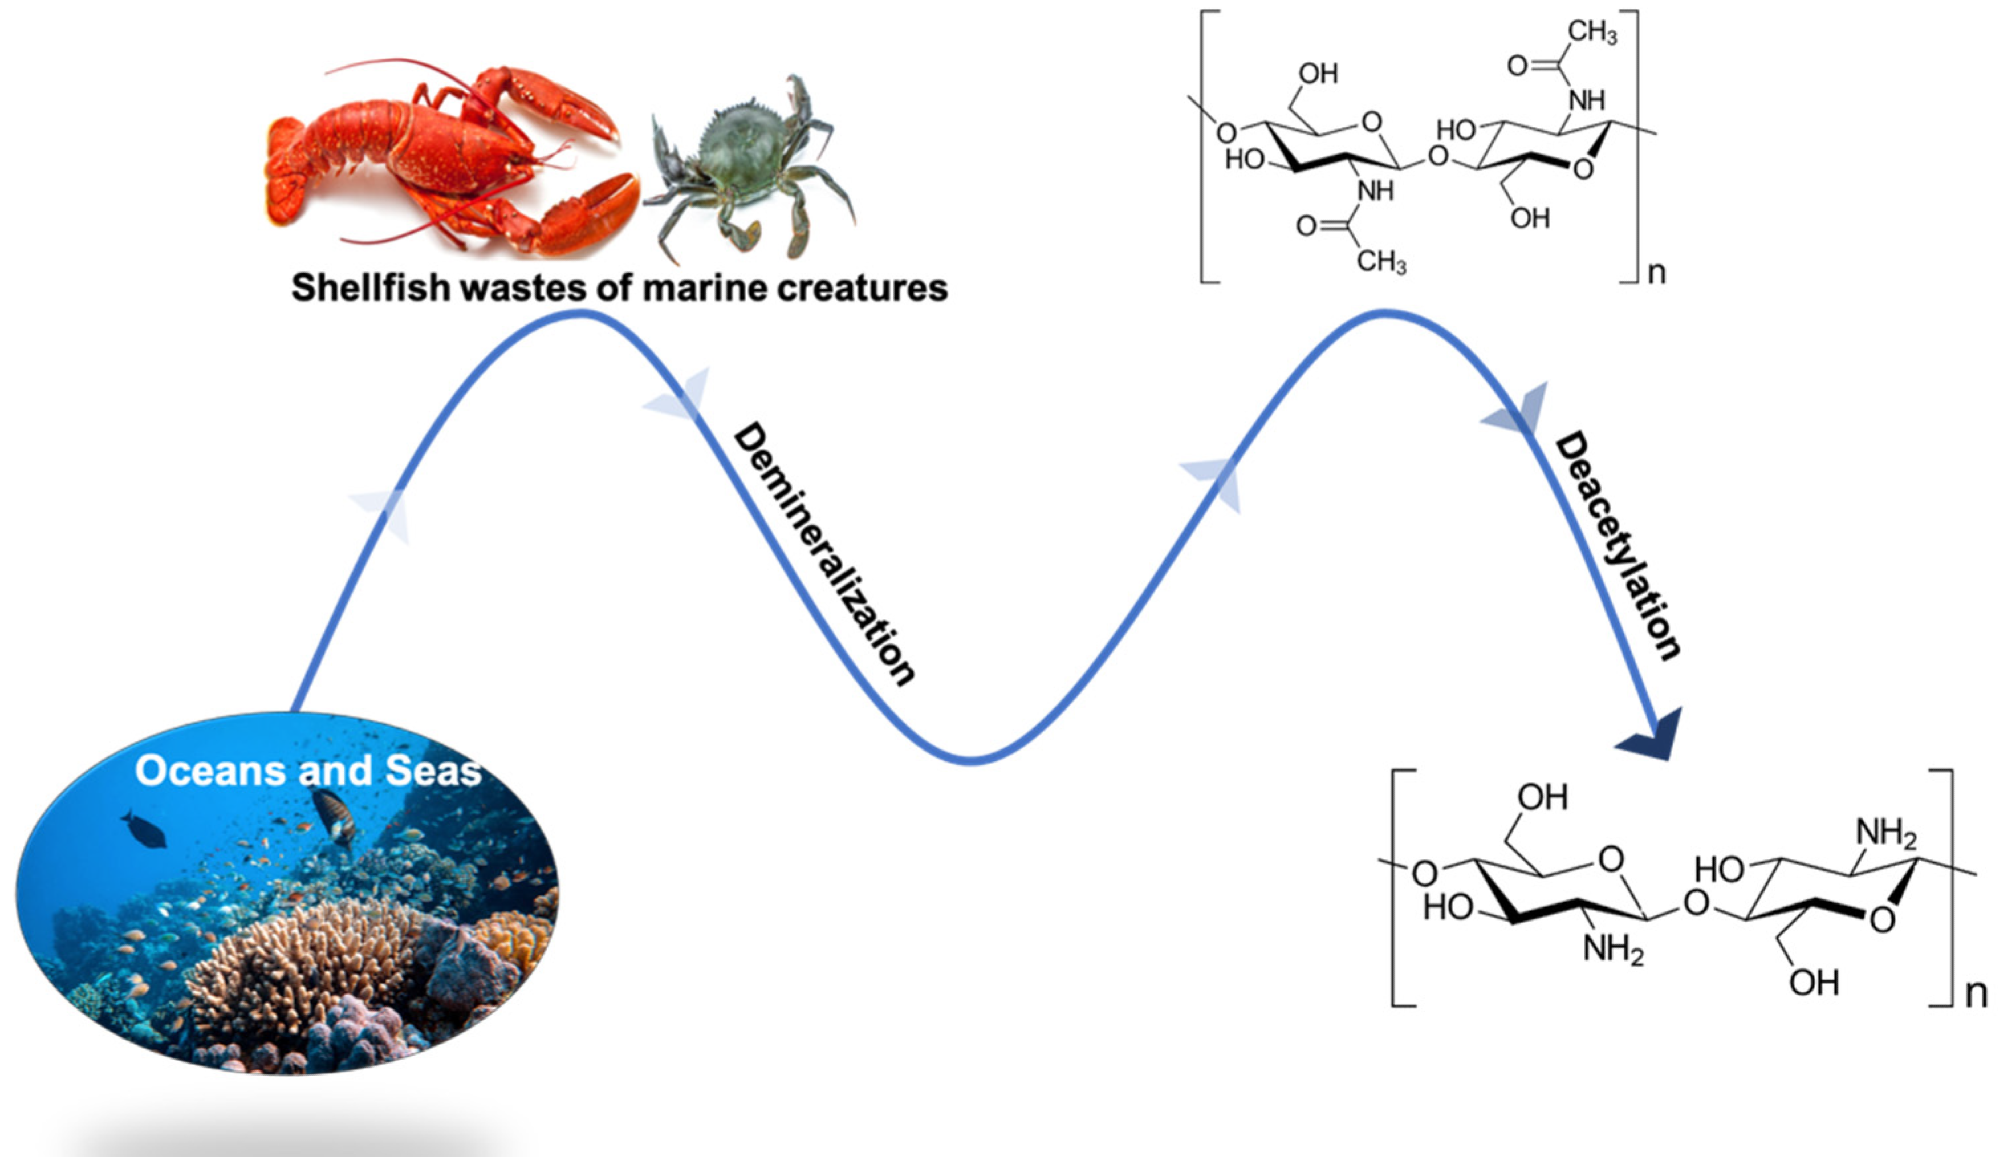 The chitin and chitosan manufacturing process